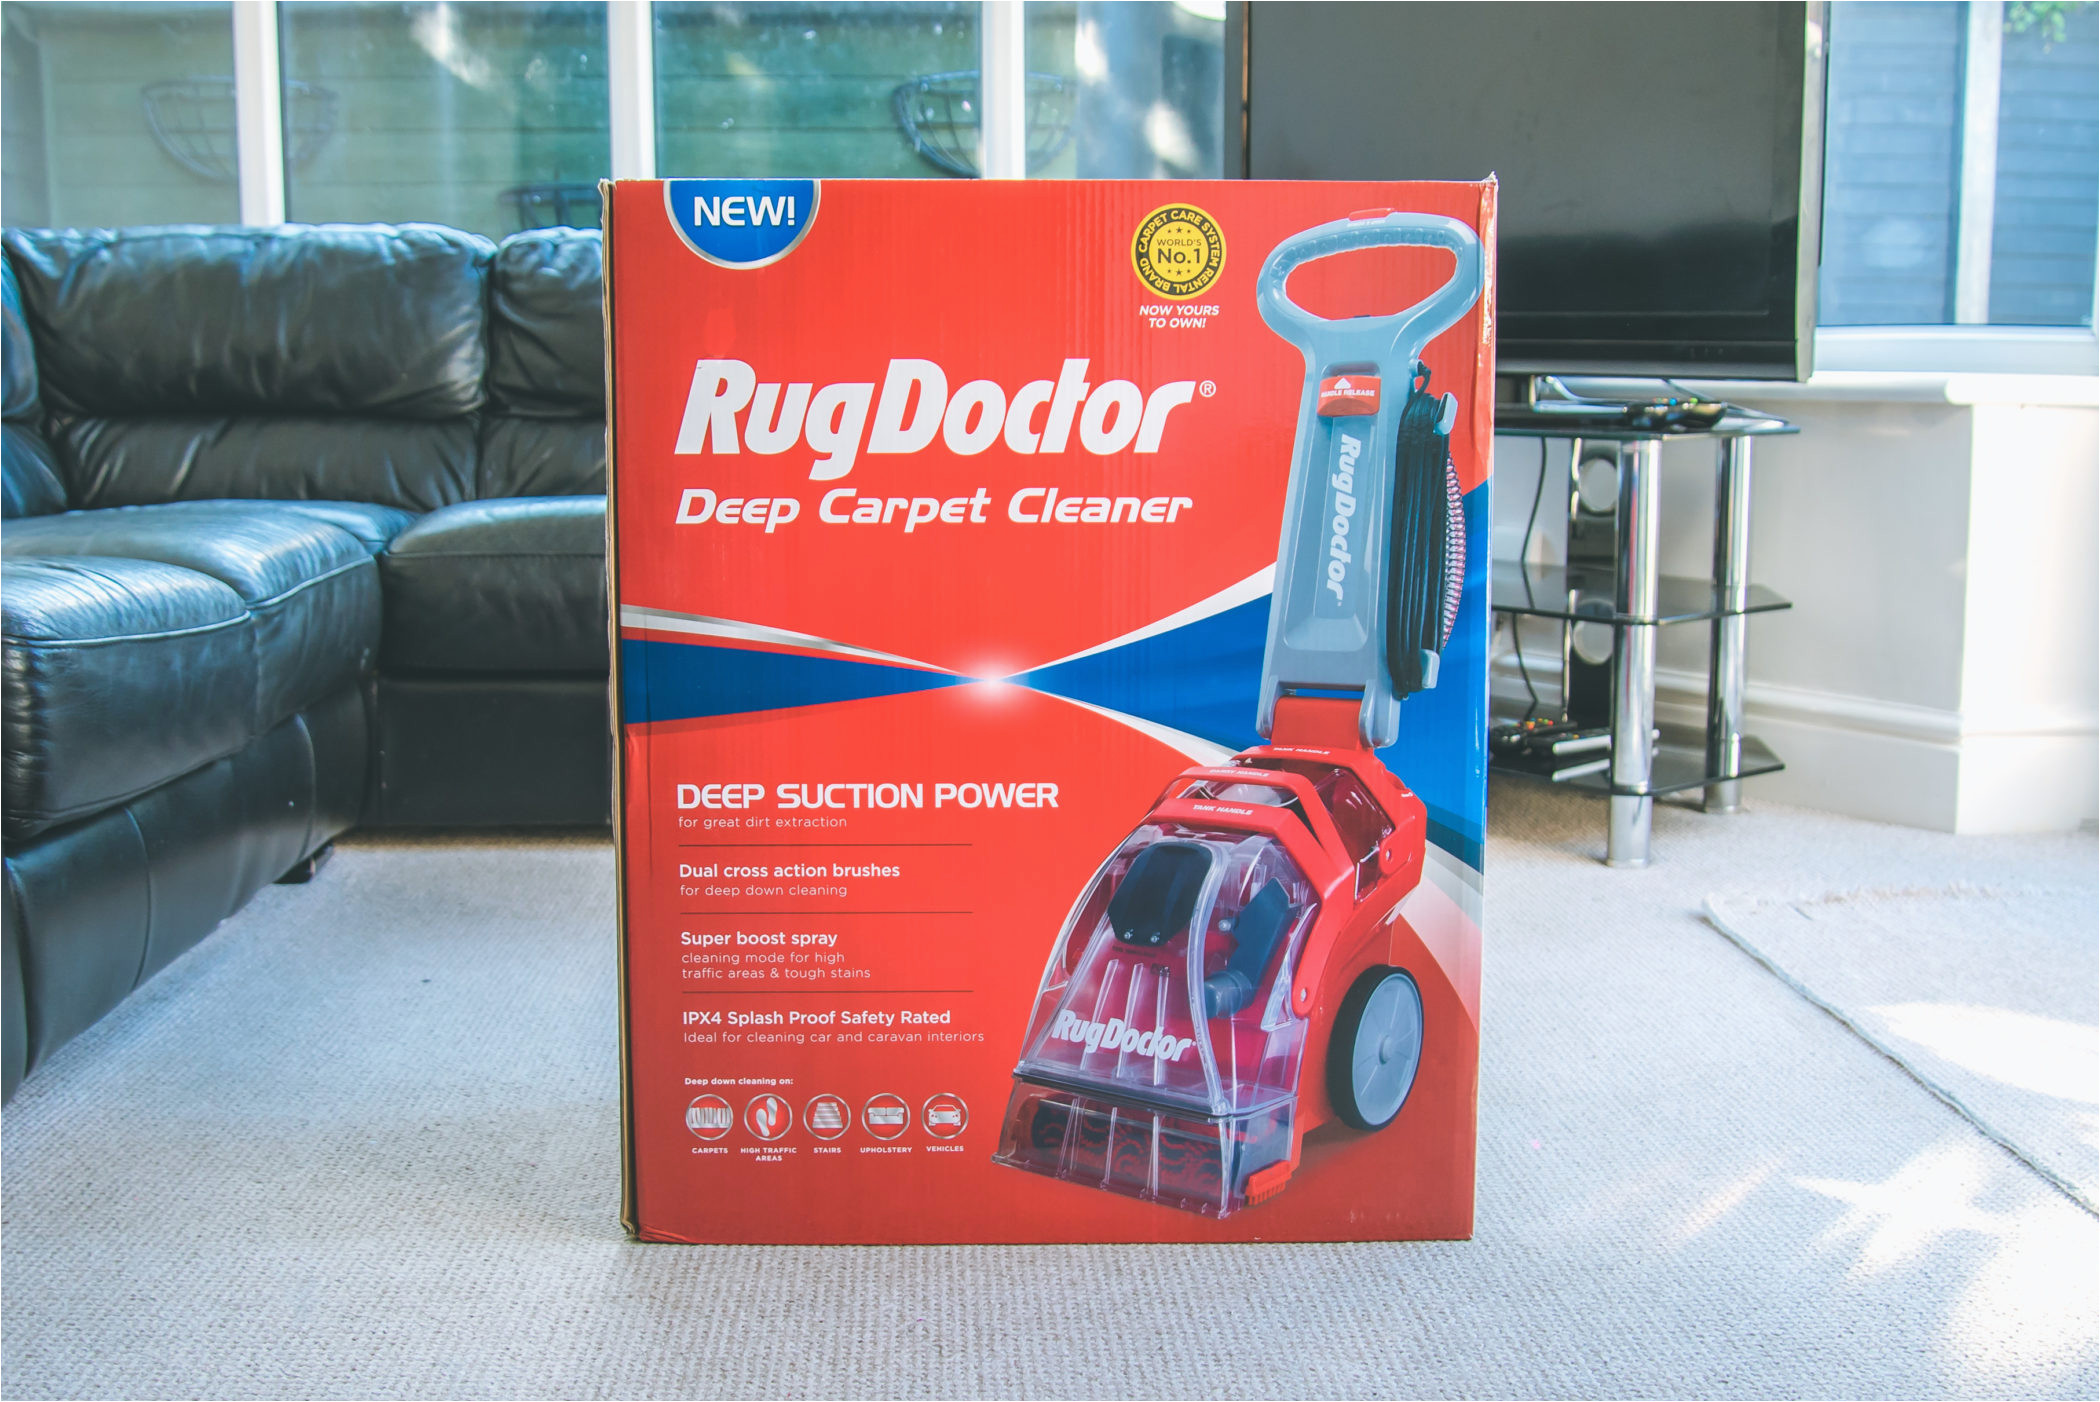 Clean area Rug with Rug Doctor Review: Rug Doctor Deep Carpet Cleaner – Five Little Doves